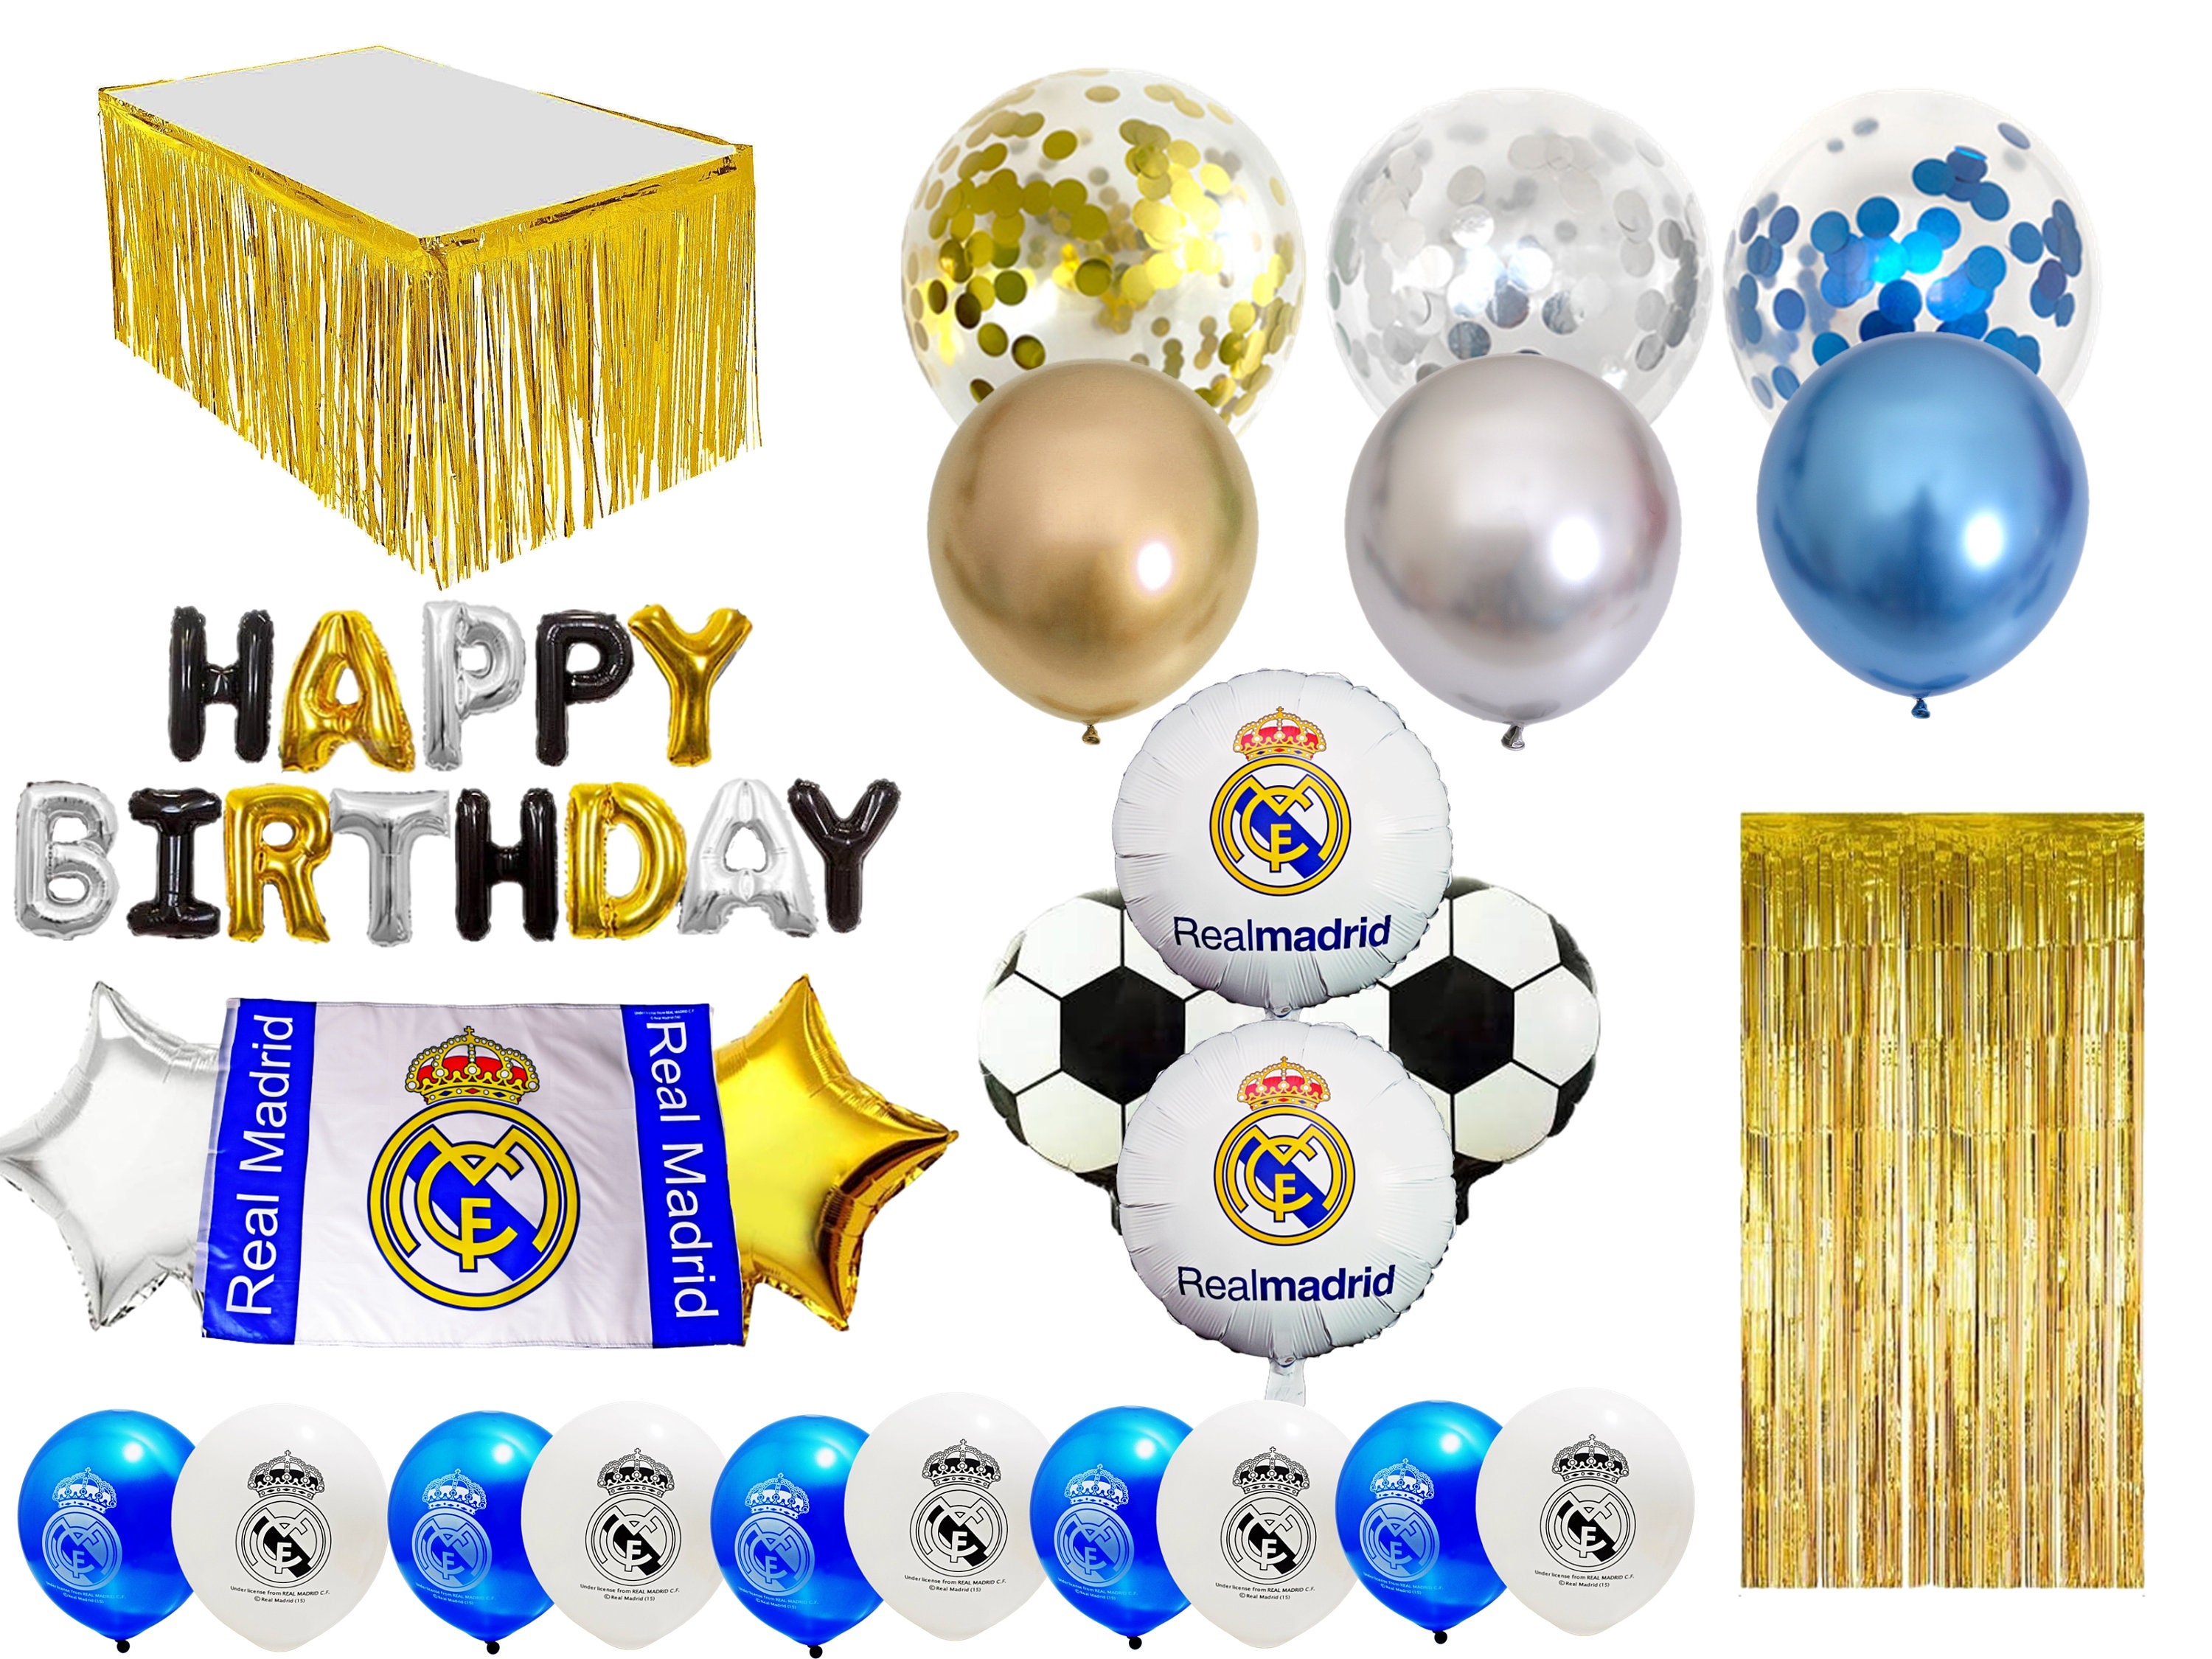  Soccer Theme Birthday Party Supplies, Real Madrid CF Theme  Balloons for Party Decorations, Cristiano Ronaldo Birthday Party Favors :  Toys & Games